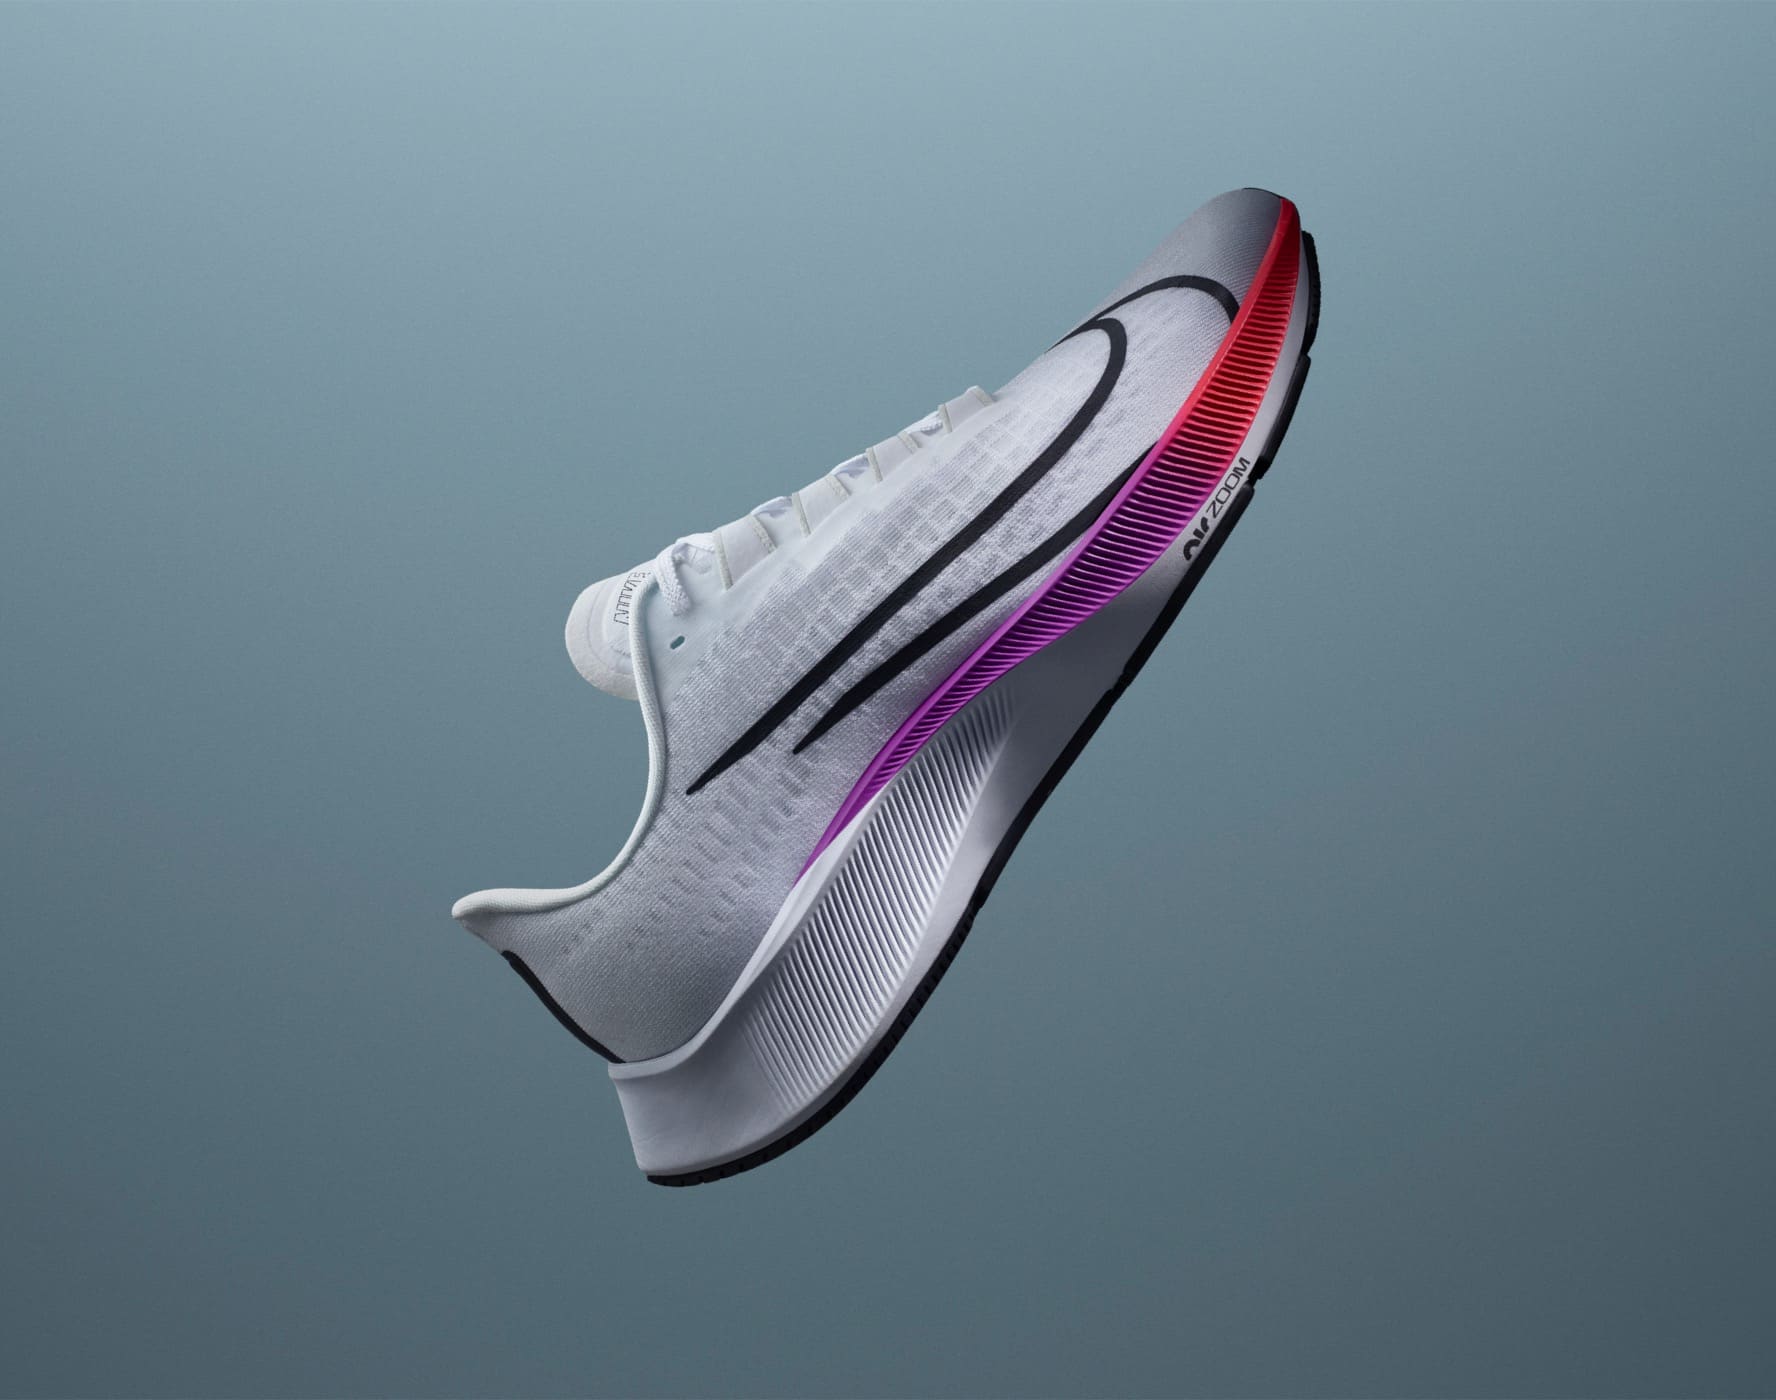 Bookkeeper mute Slovenia Nike Vaporfly. Featuring the new Vaporfly NEXT%. Nike.com